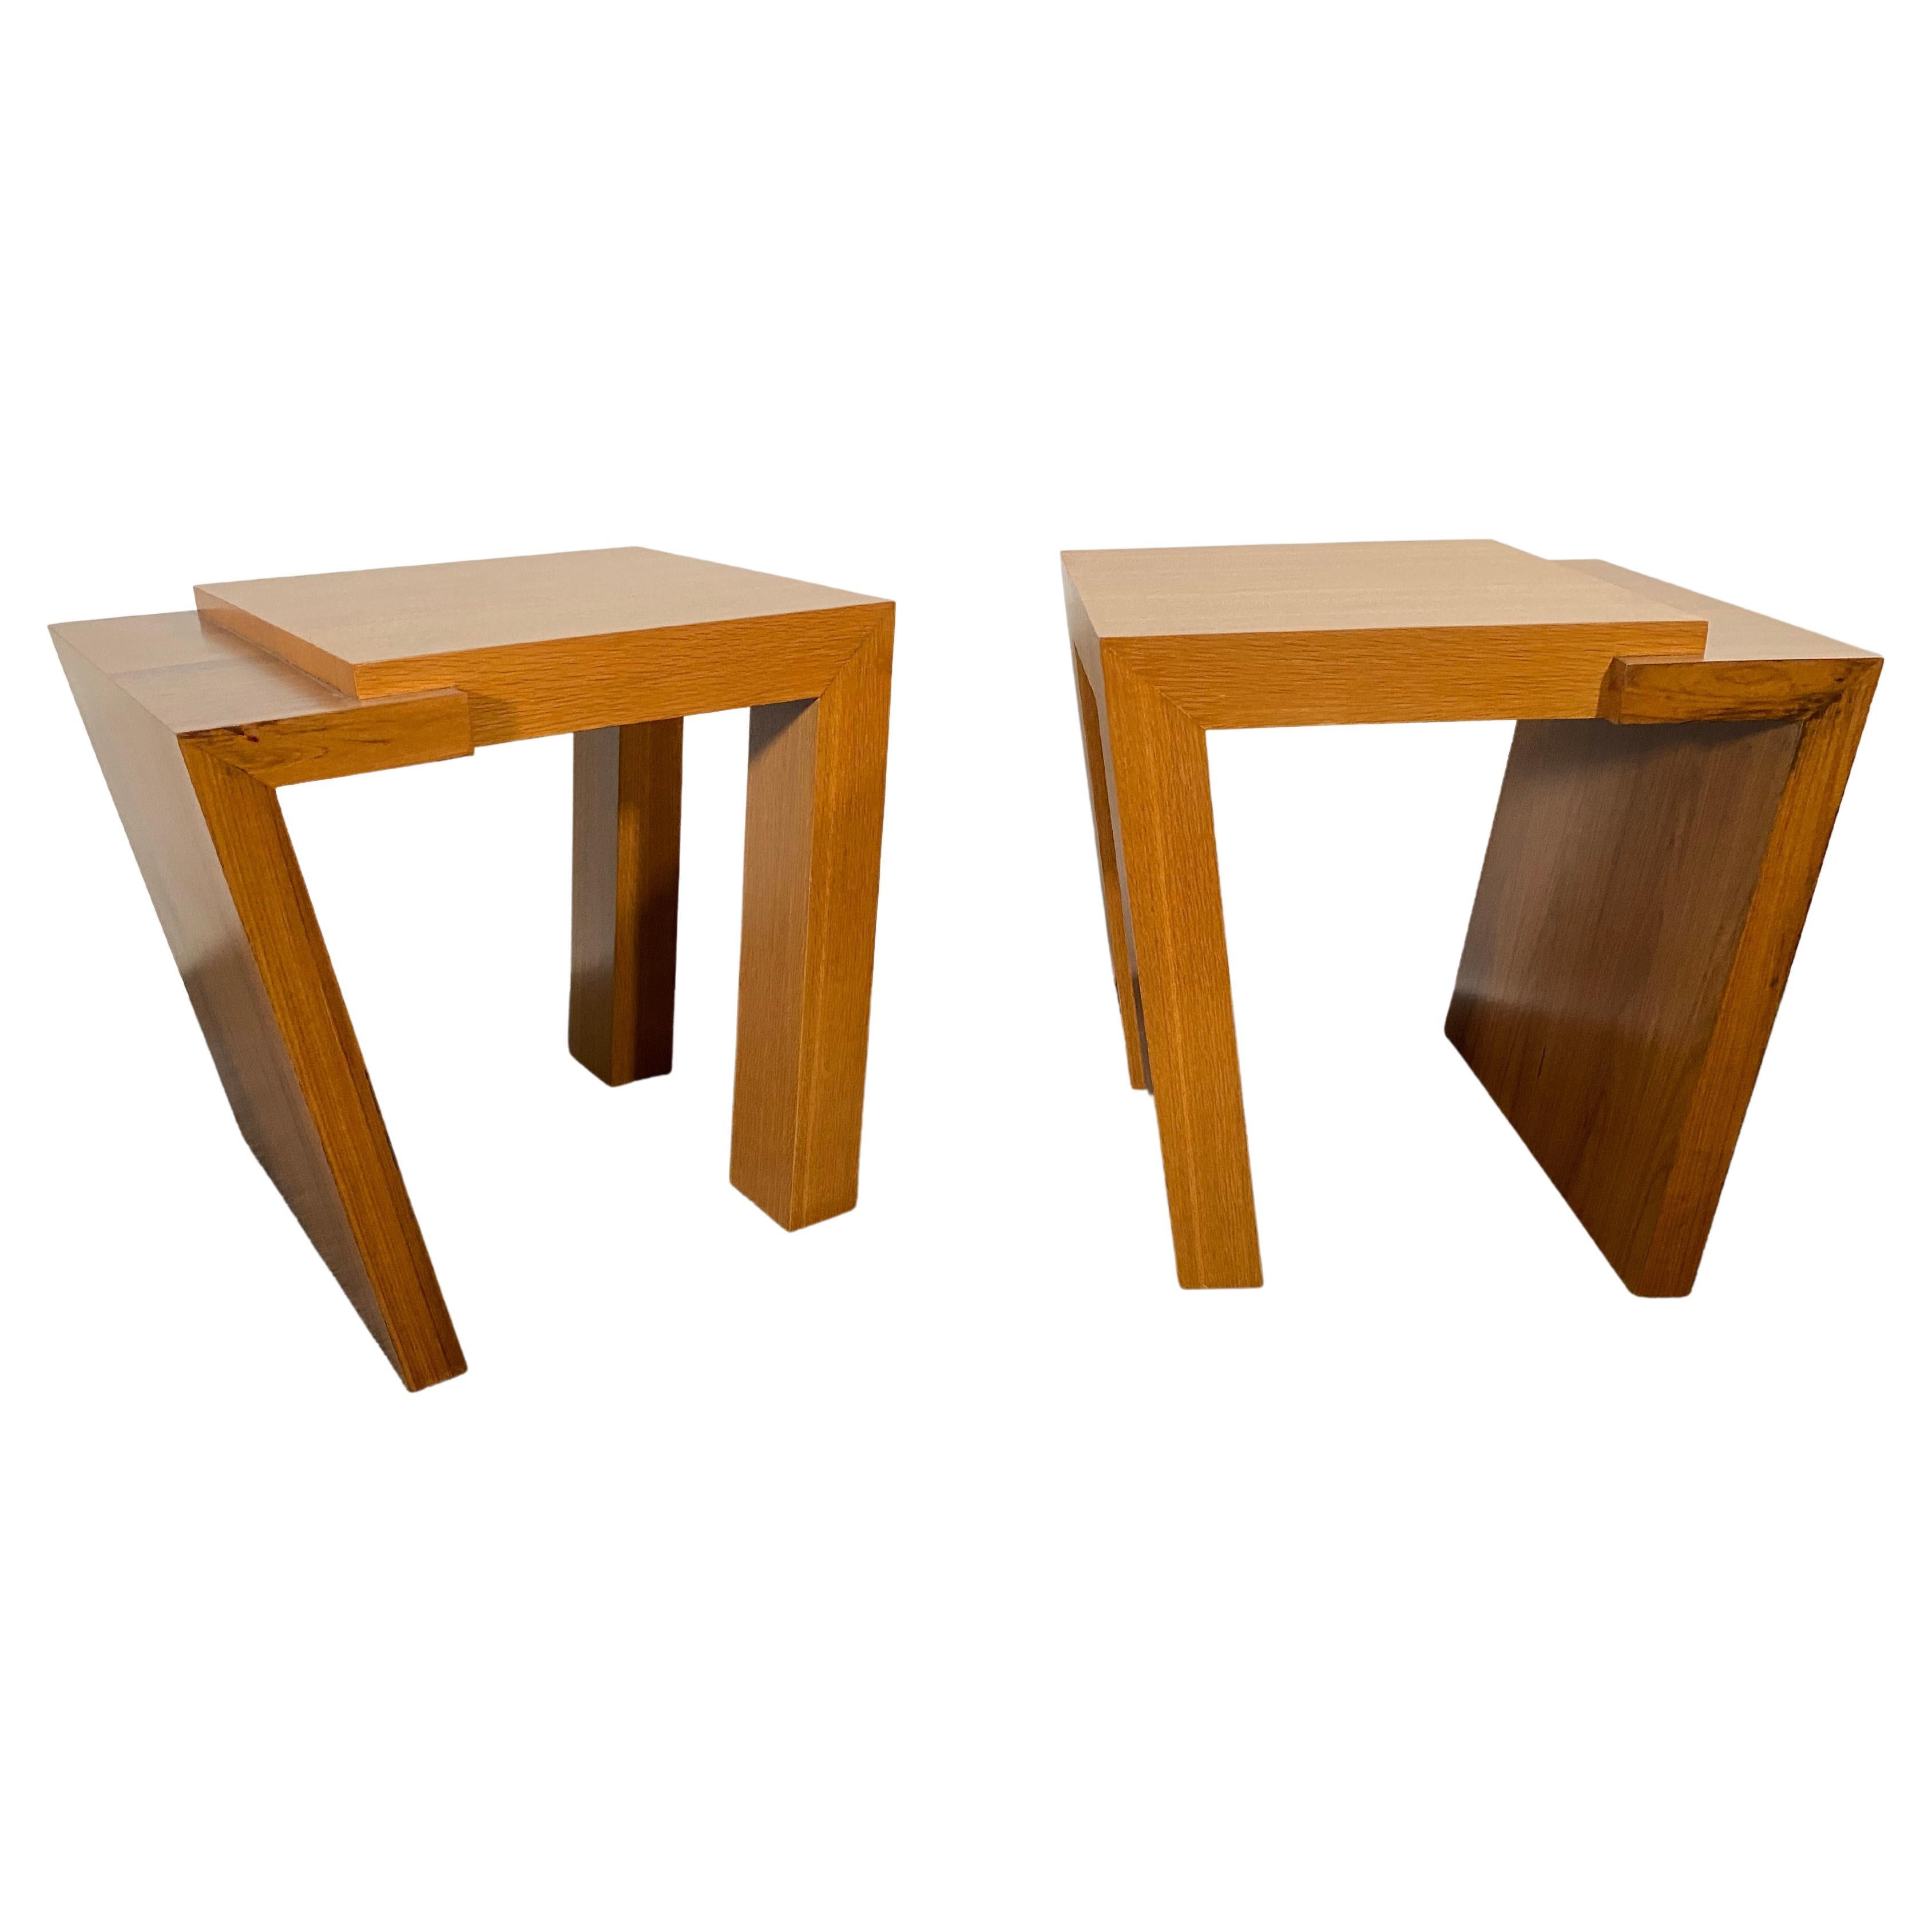 Unique Bespoke Pair Walnut and Bleached Mahogany End Tables, Antonio Fortuna For Sale